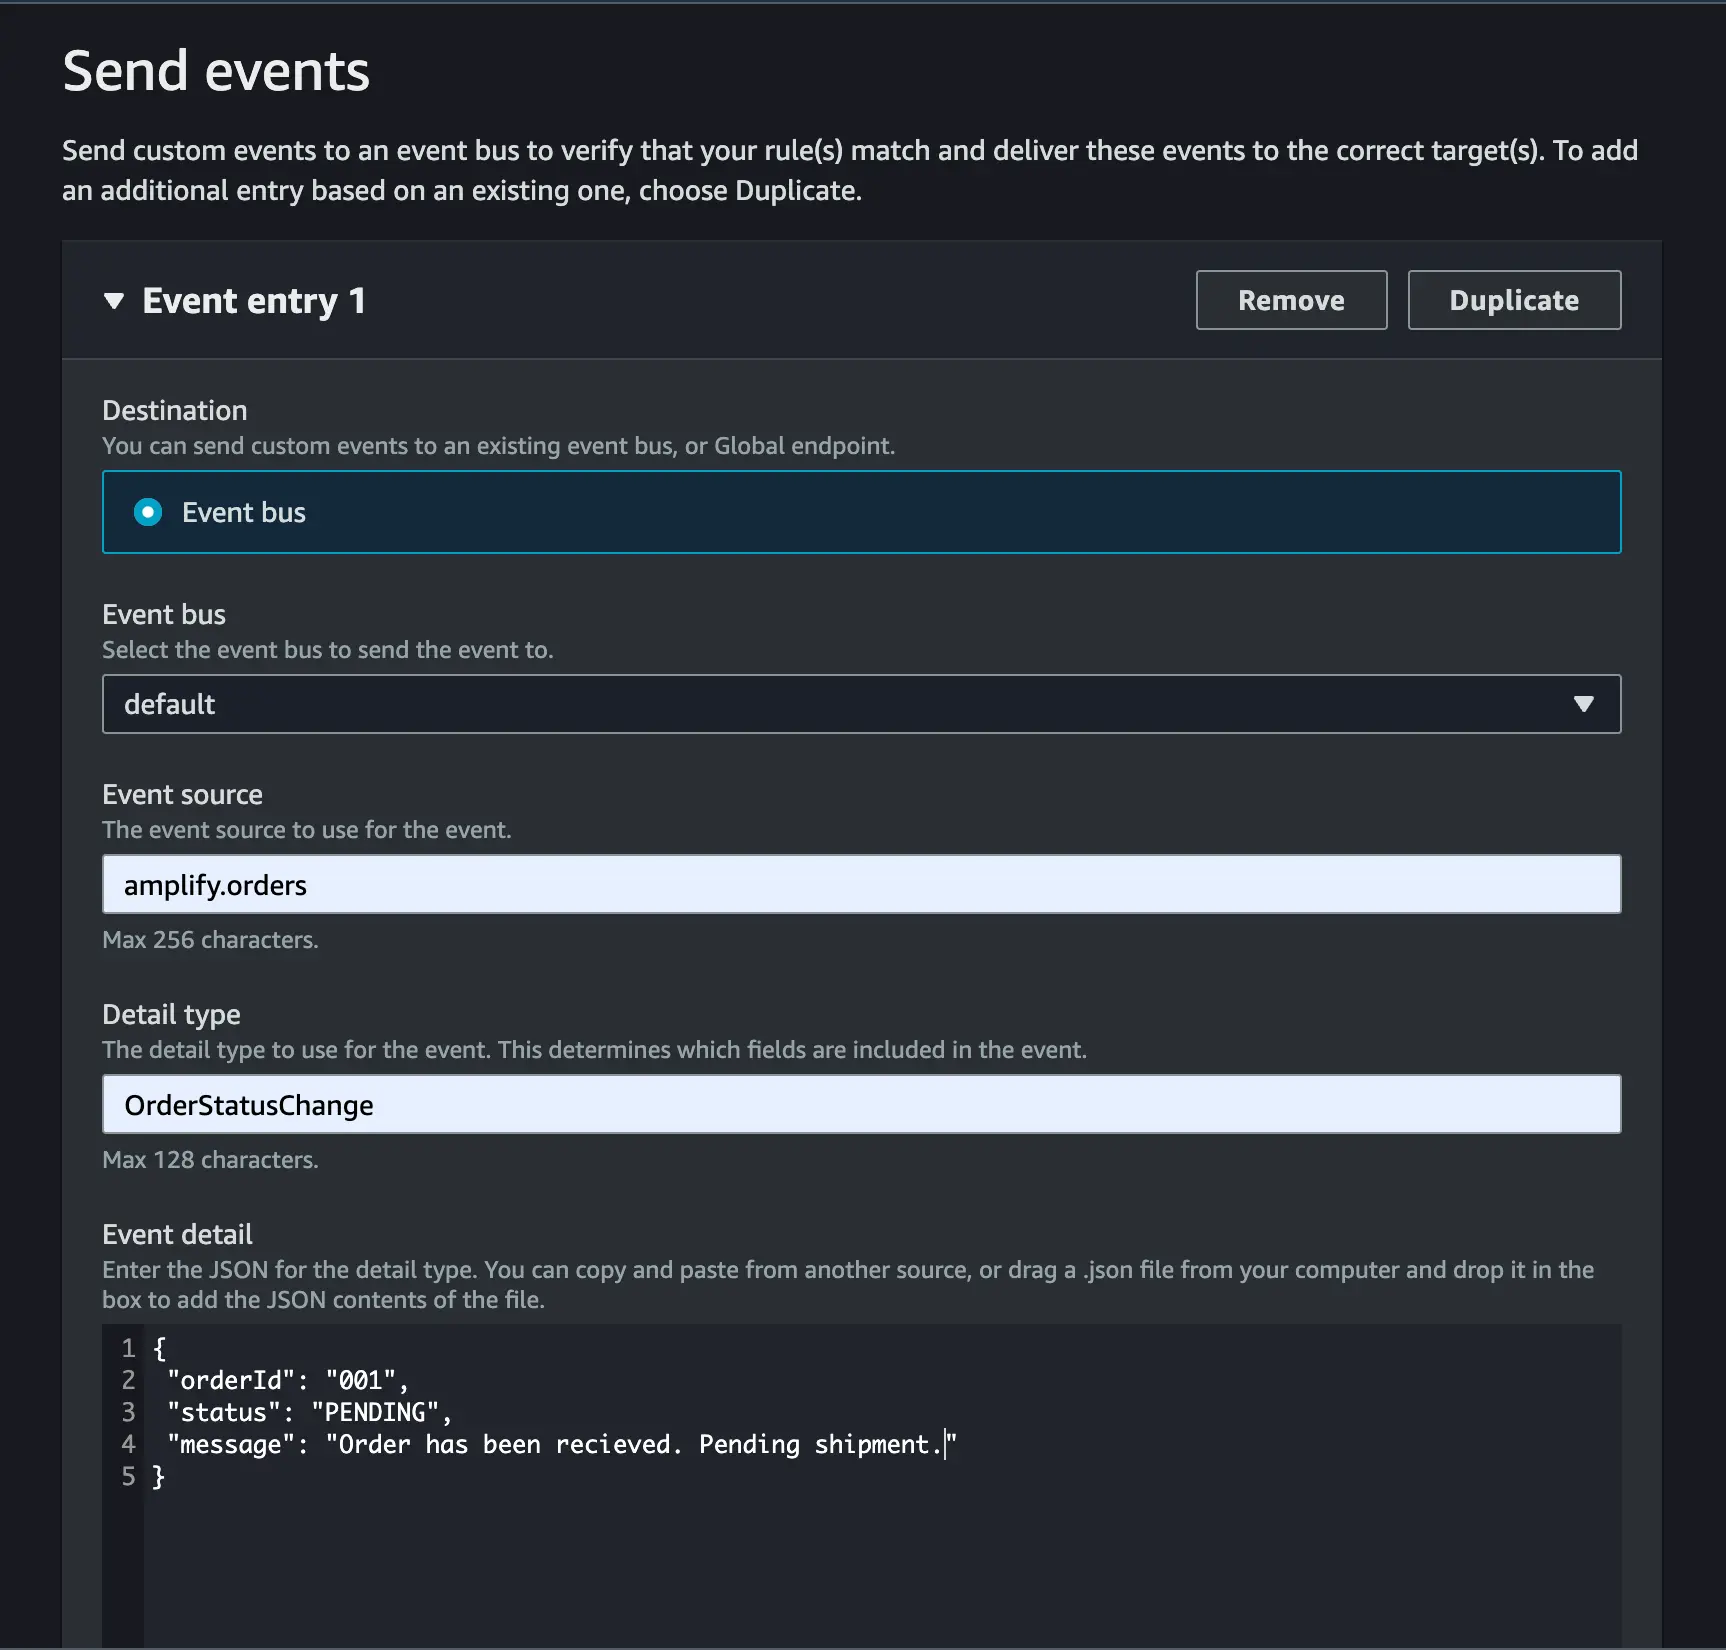 Amazon EventBridge console, page titled "Send events". Shows a form with input fields and values of "event bus: default", "event source: amplify.orders", "detail type: OrderStatusChange", and an Event detail field with JSON data containing an "orderId", "status", and "message". 